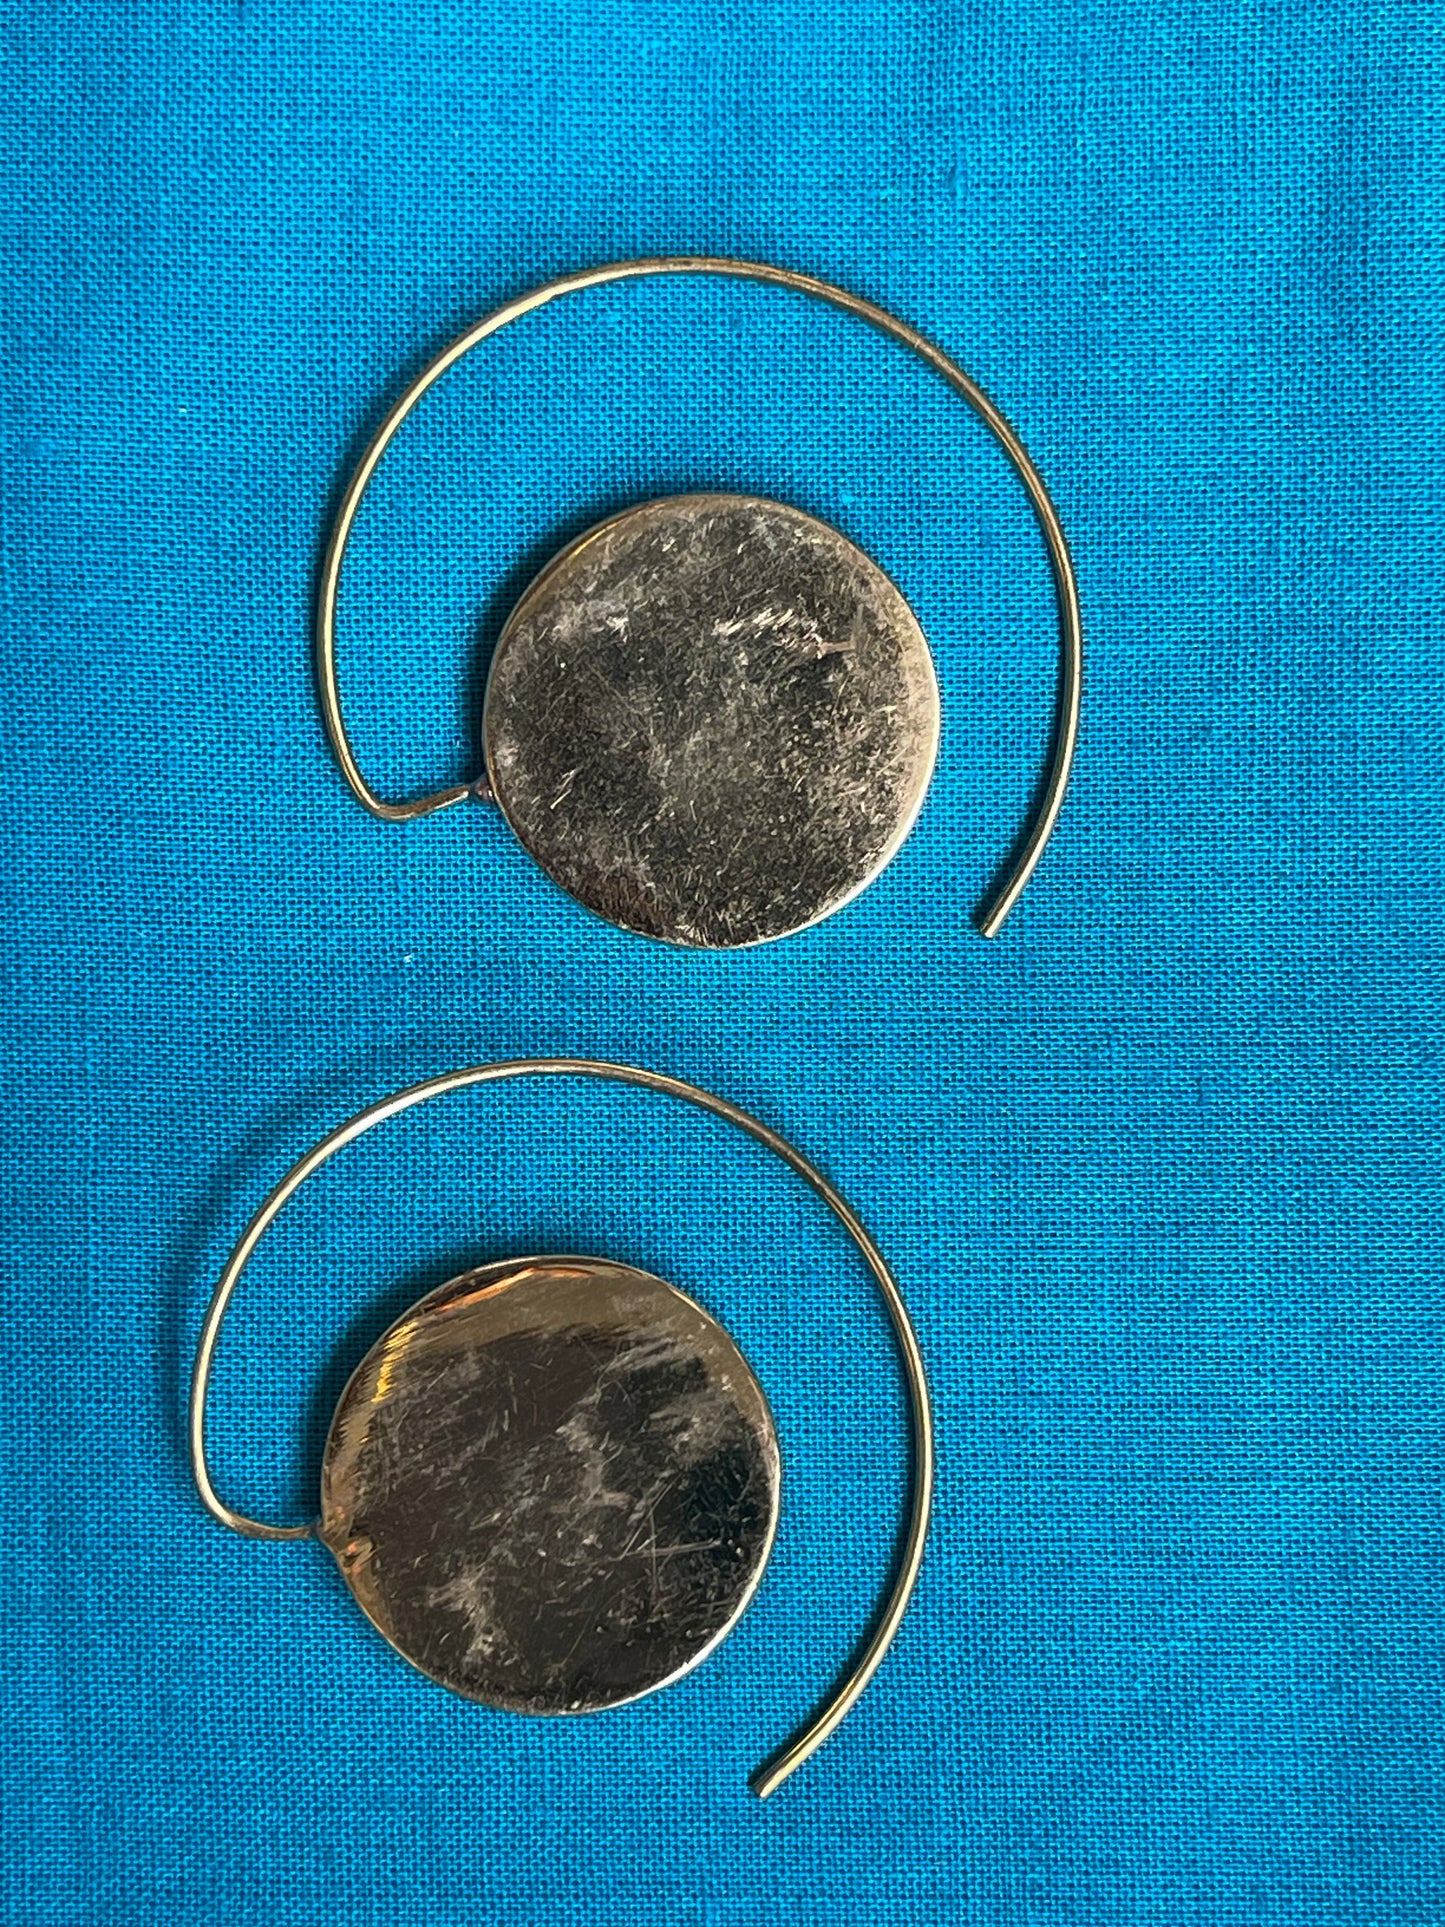 Solid circle in the center - brass side hooks earrings